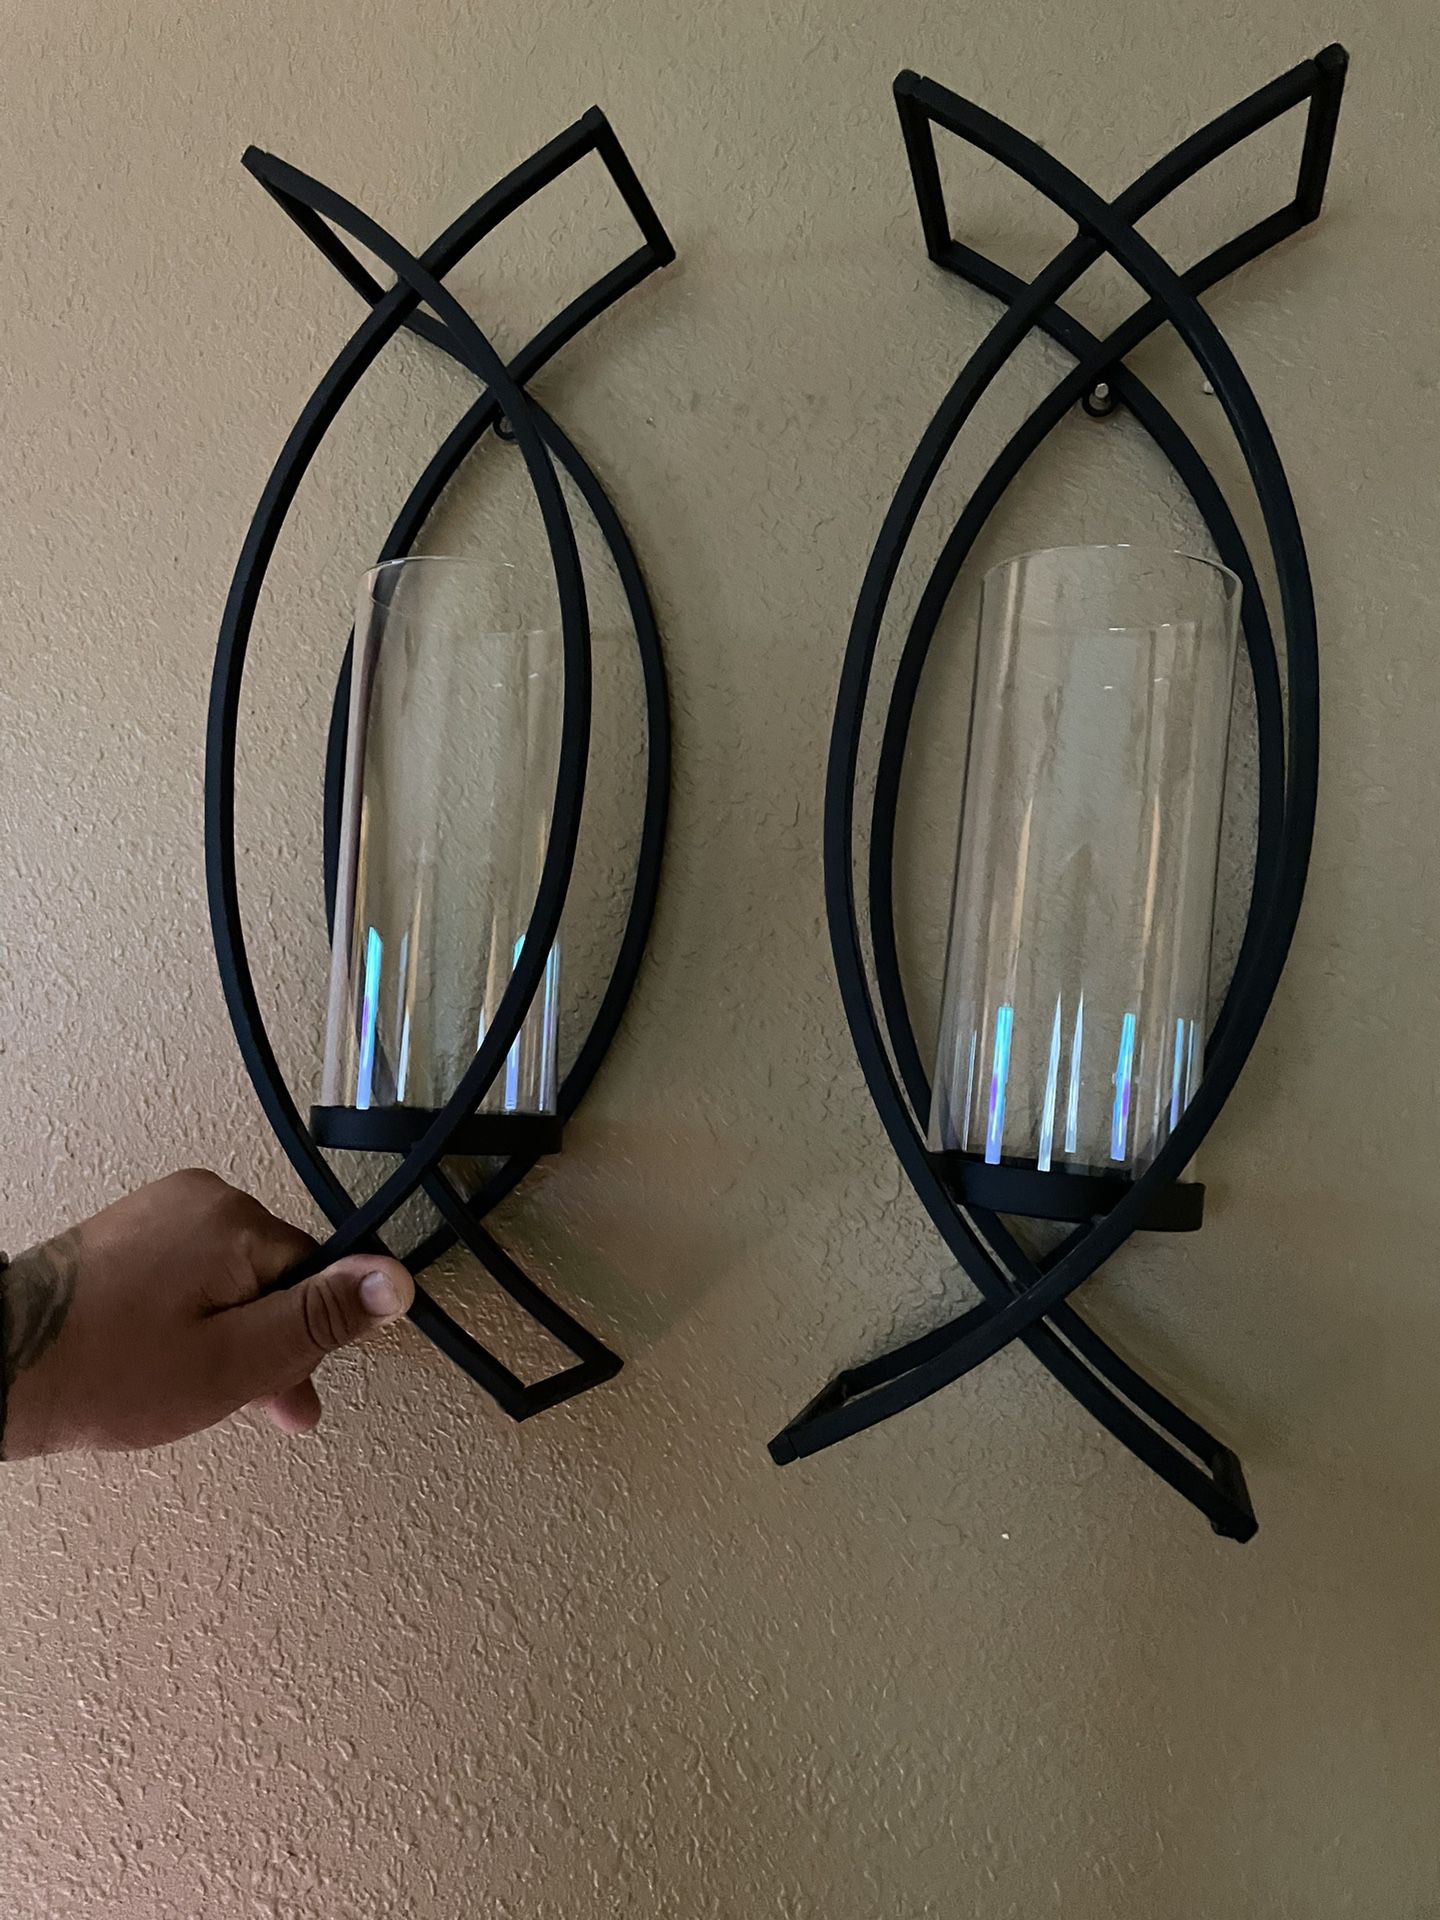 Two Metal Black Wall Candle Holders